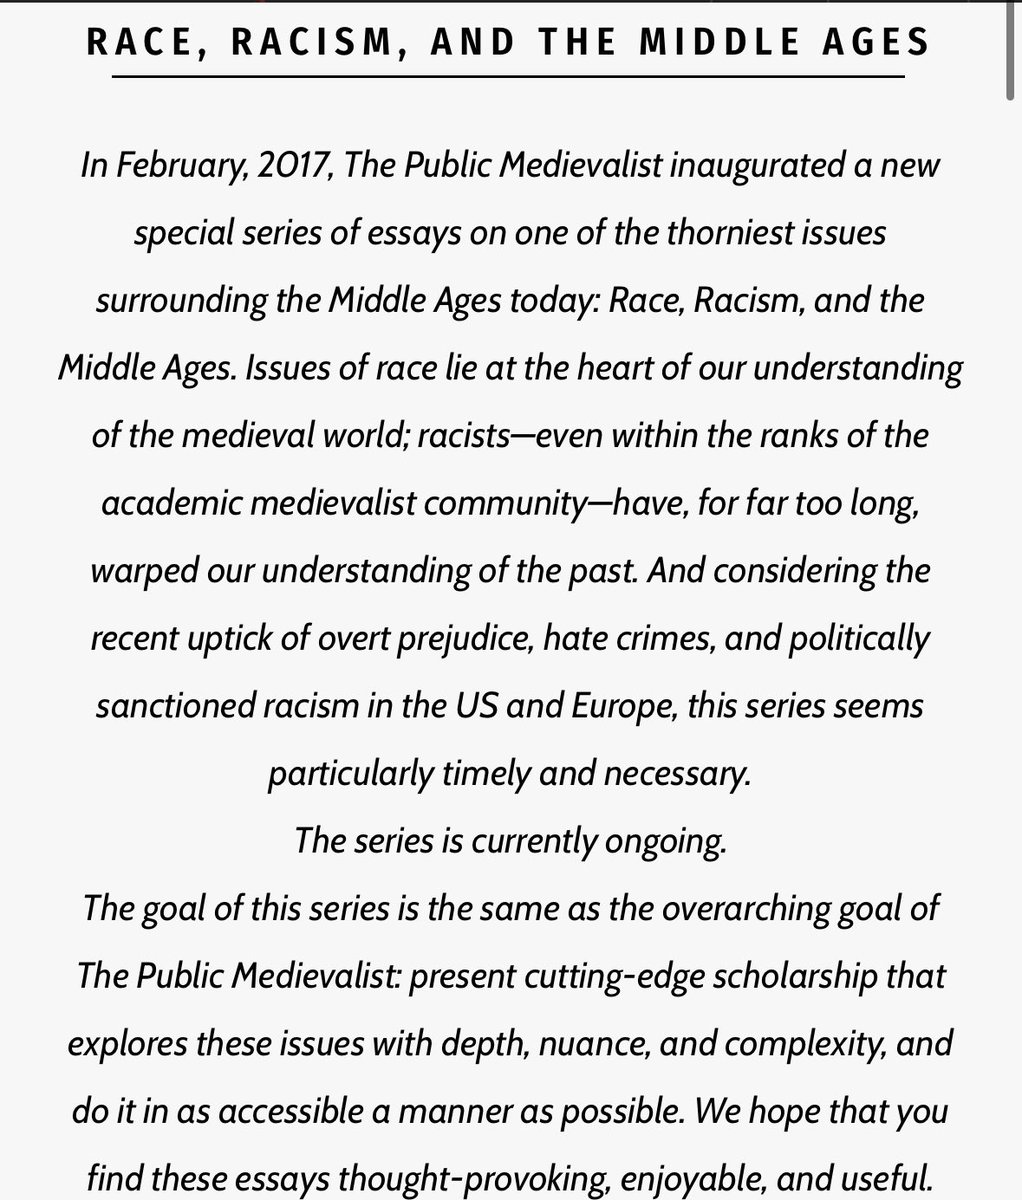 for anyone else into medieval history and medieval culture, I *highly* recommend this blog series on The Public Medievalist’s website

a bunch of essays by scholars of the Middle Ages discussing the issues of race, antisemitism, prejudice, and racial historiography of the period